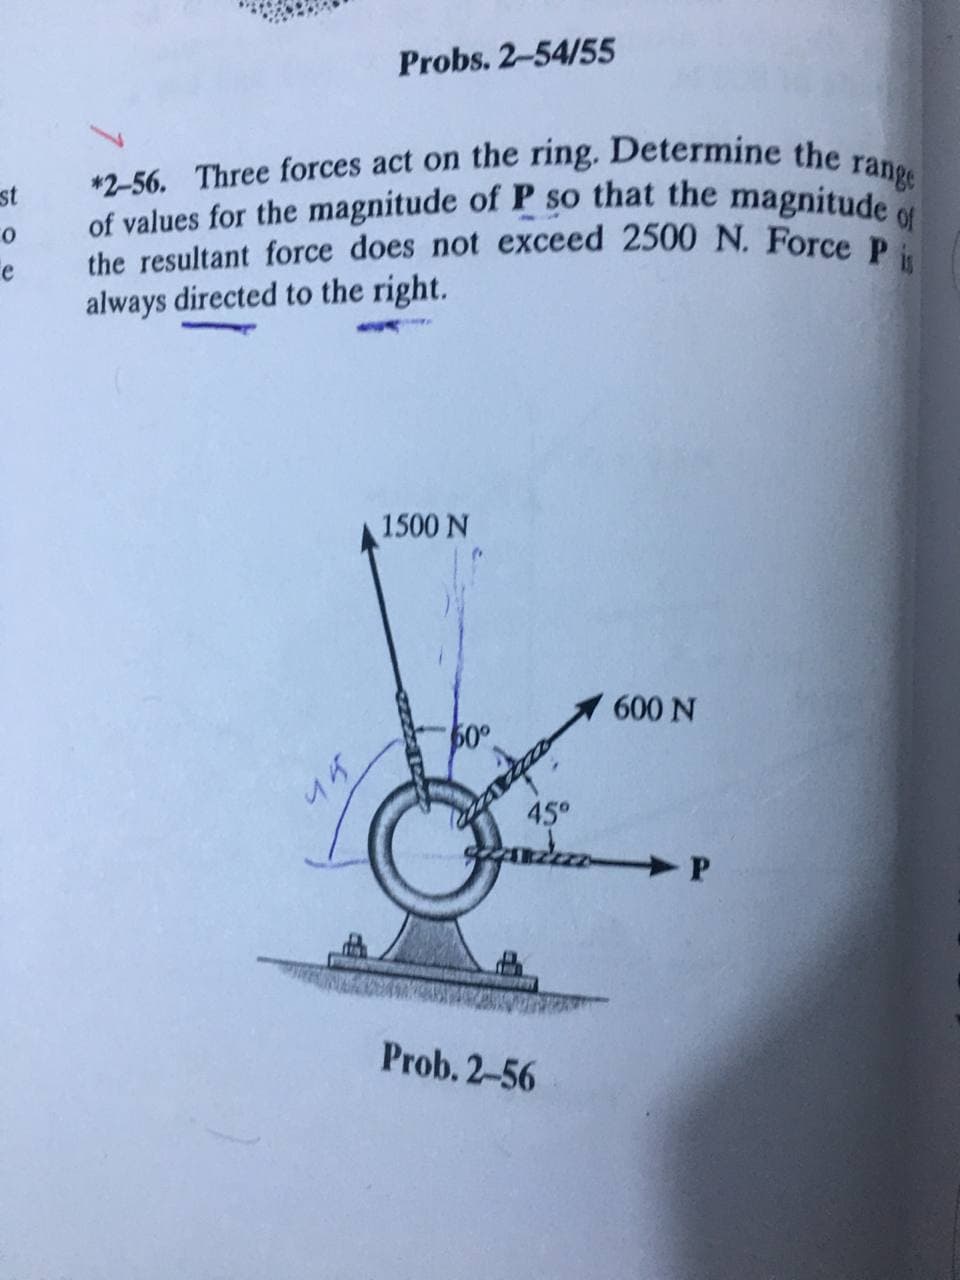 of values for the magnitude of P so that the magnitude of
*2-56. Three forces act on the ring. Determine the range
the resultant force does not exceed 2500 N. Force P is
Probs. 2-54/55
st
always directed to the right.
1500 N
600 N
45°
Prob. 2-56
45
